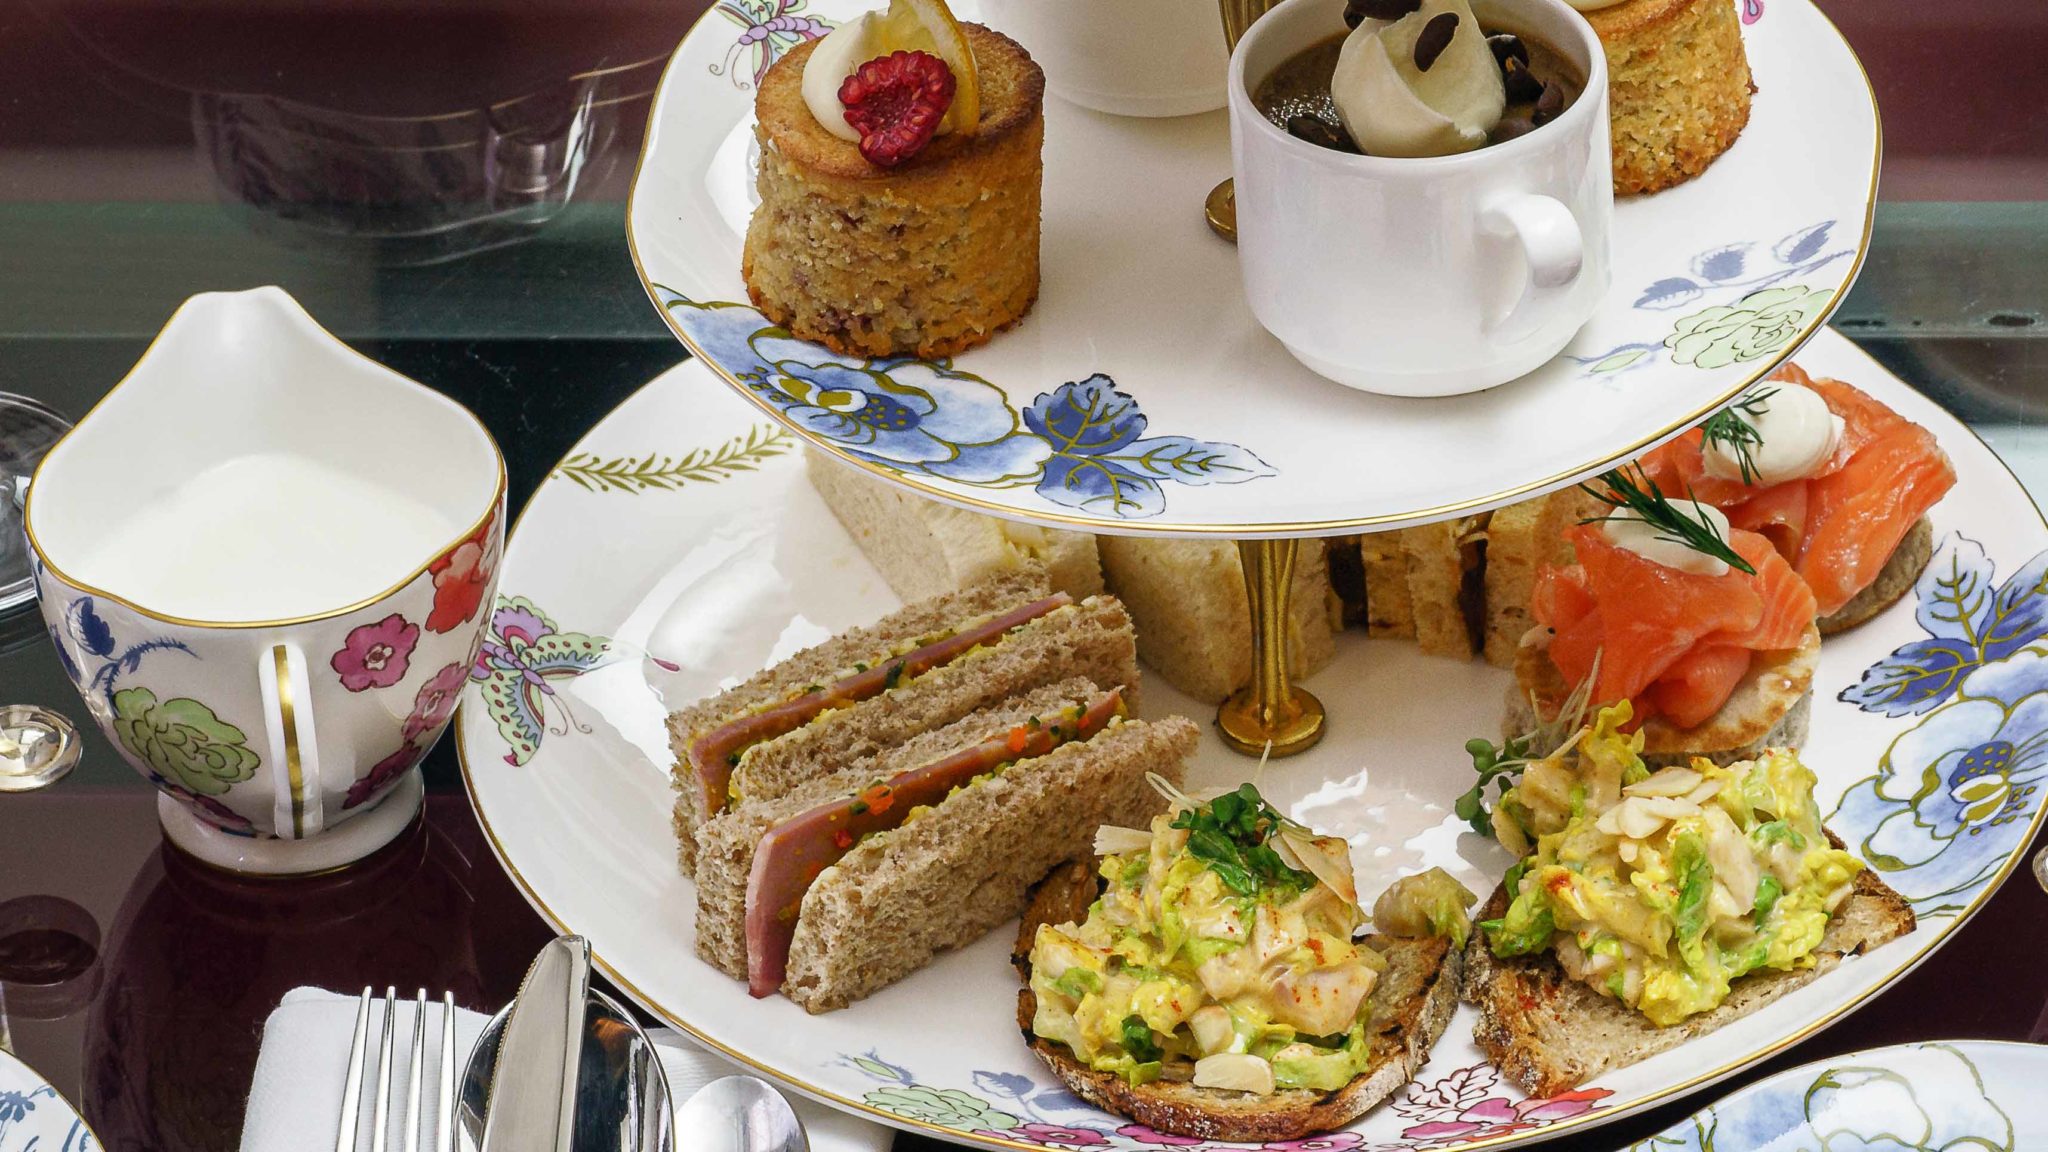 7 ideas for afternoon tea at home - Fairtrade Foundation